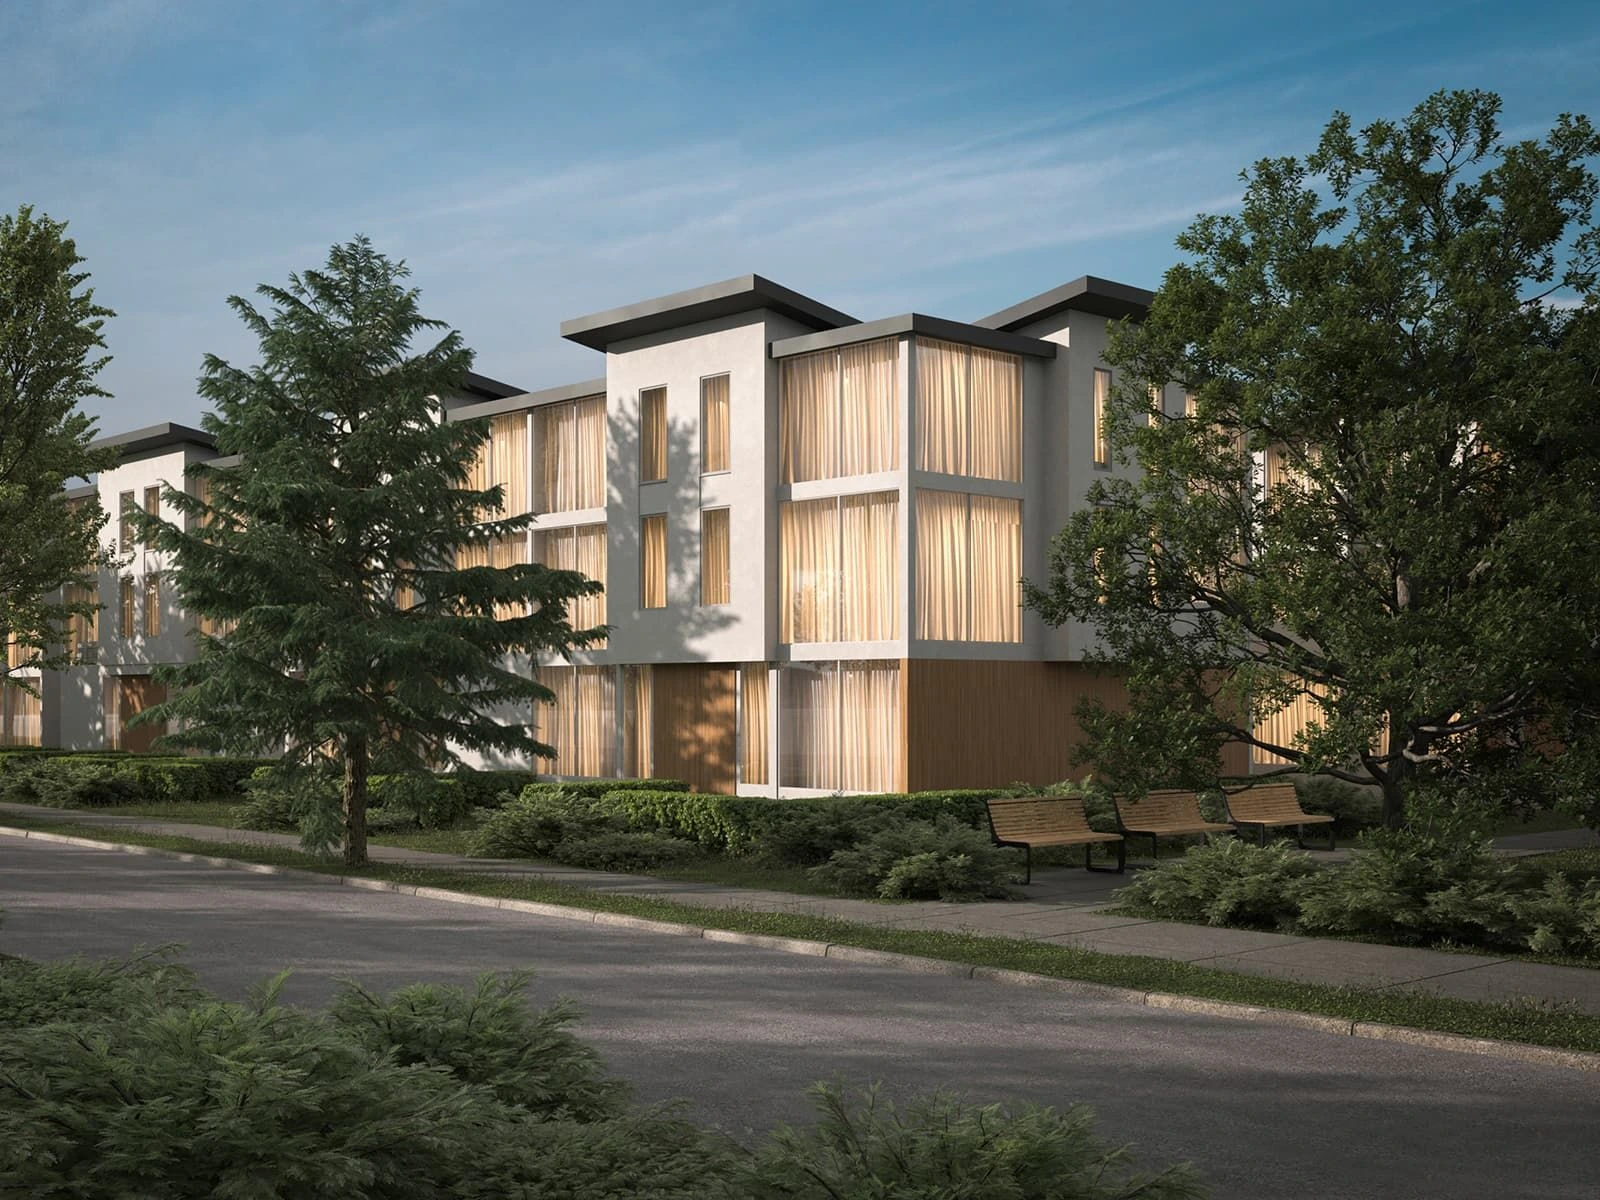 Odessa townhomes by 829 Development Group is a new 26-unit Langford residential community.